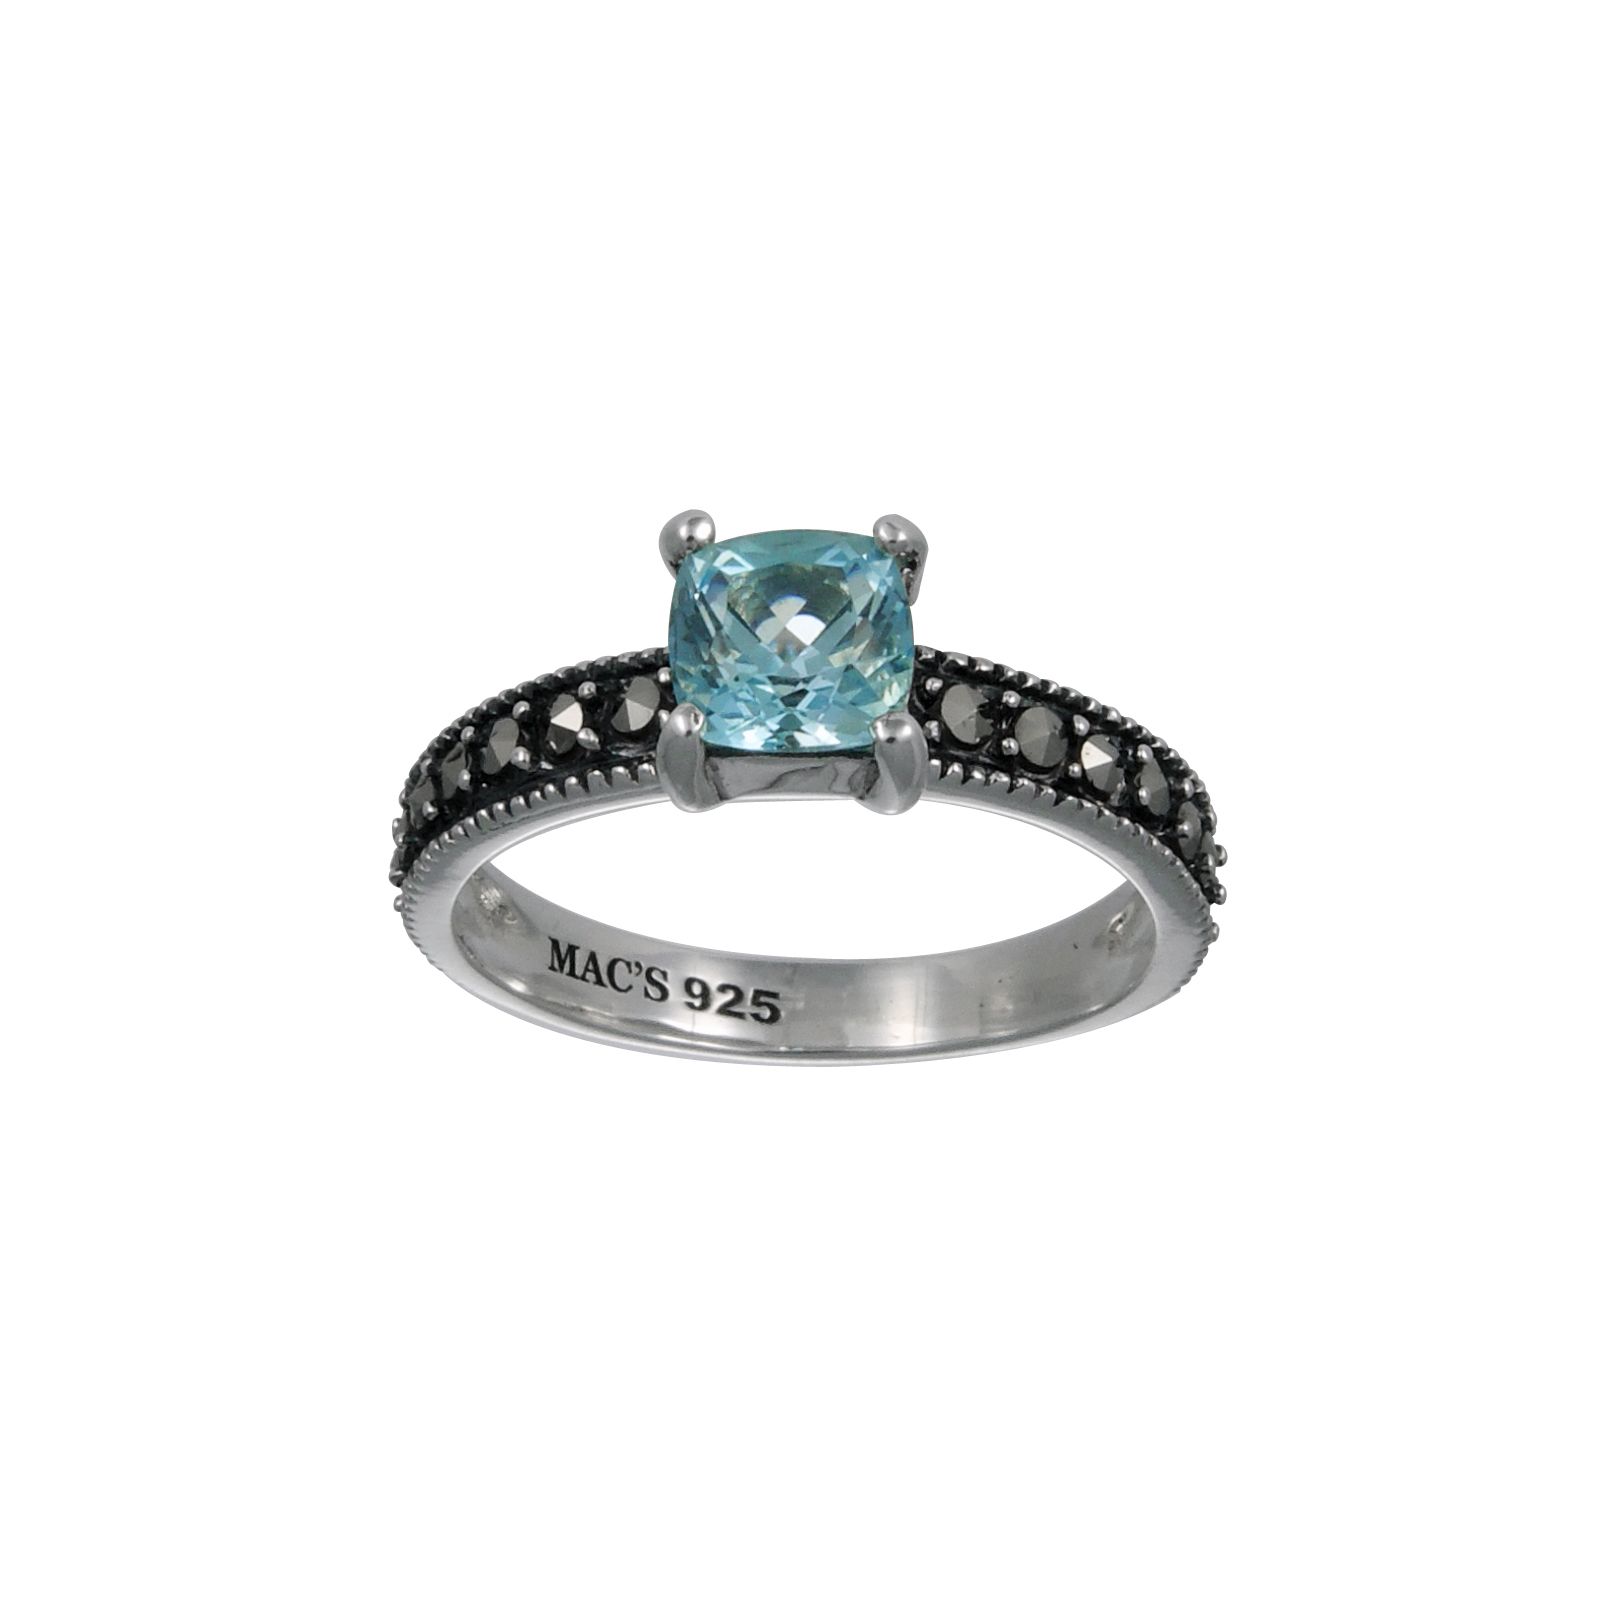 Mac's Cushion Cut Sky Blue Topaz Stone Ring with Marquisite accent